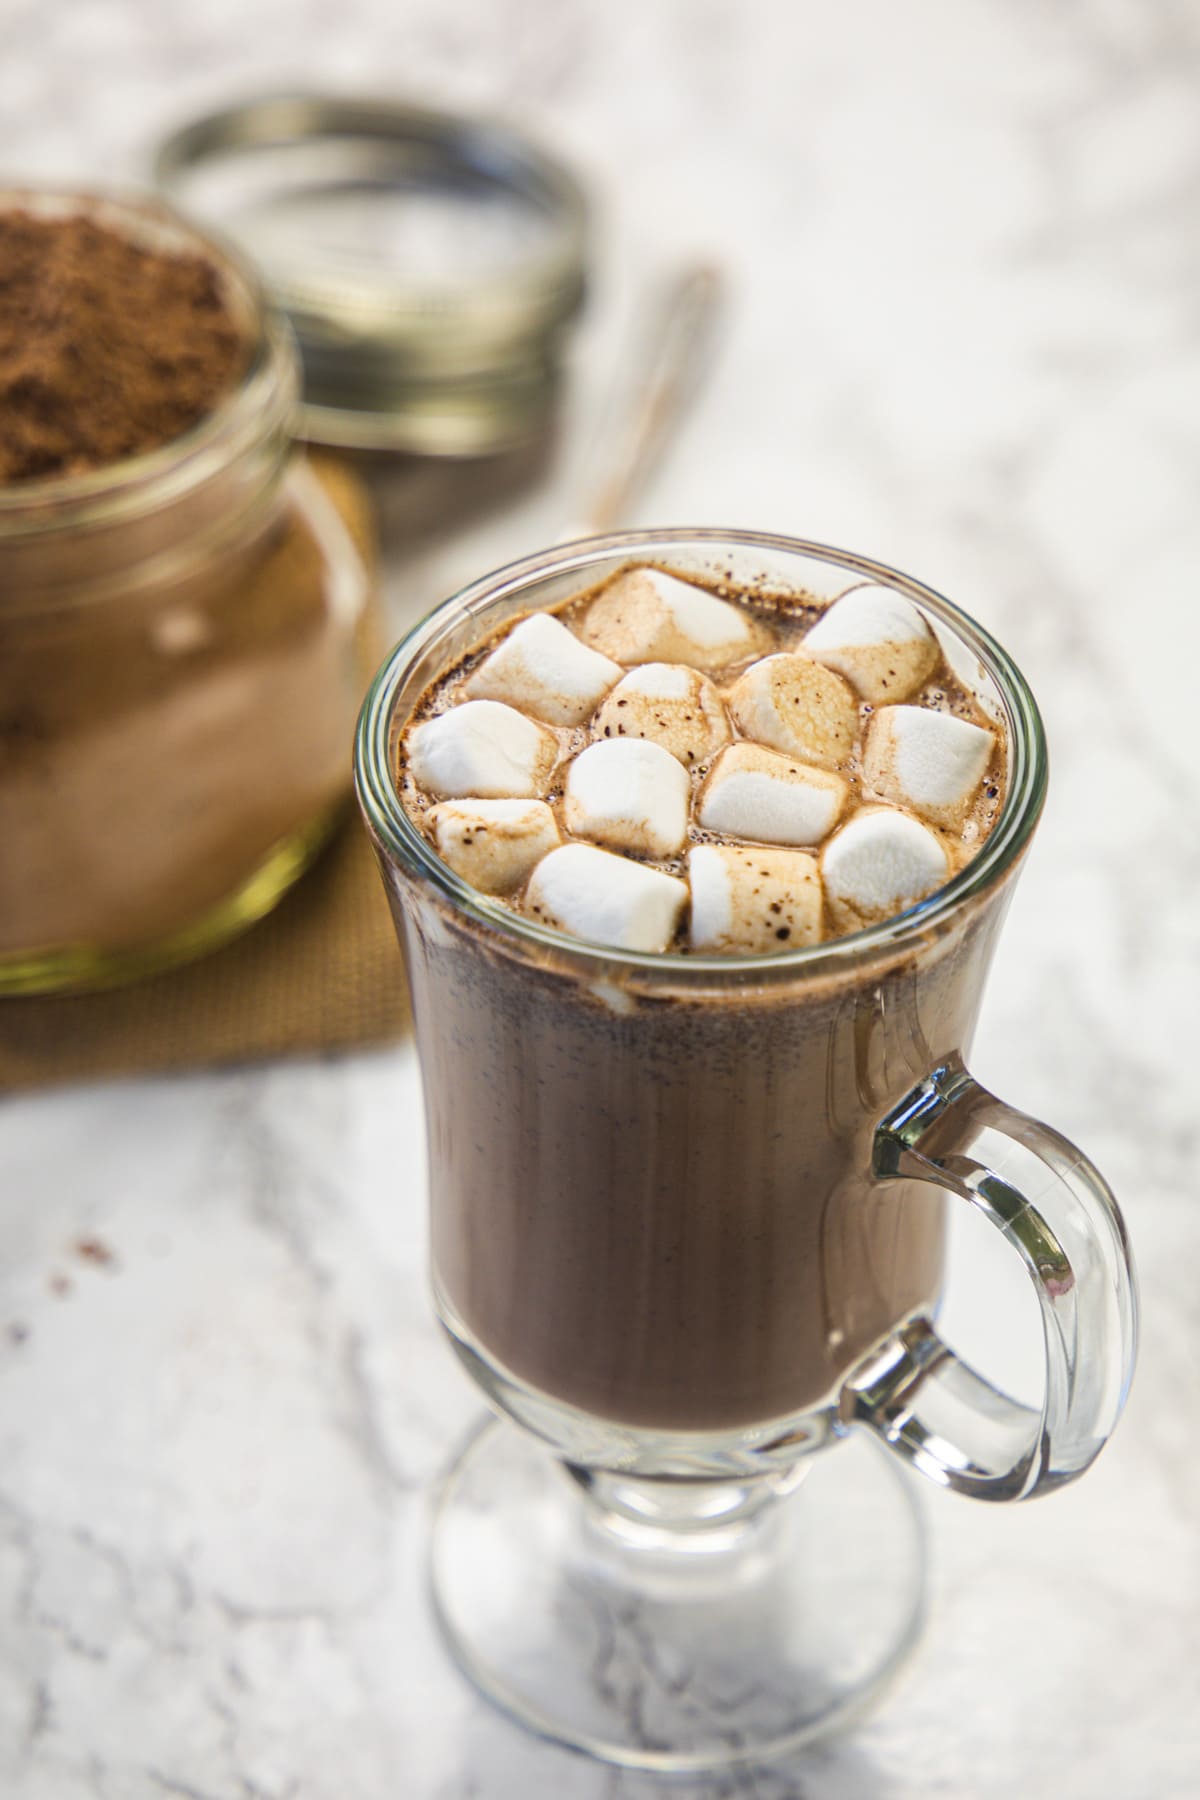 Hot chocolate drink topped with marshmallows and hot chocolate mix in the back.